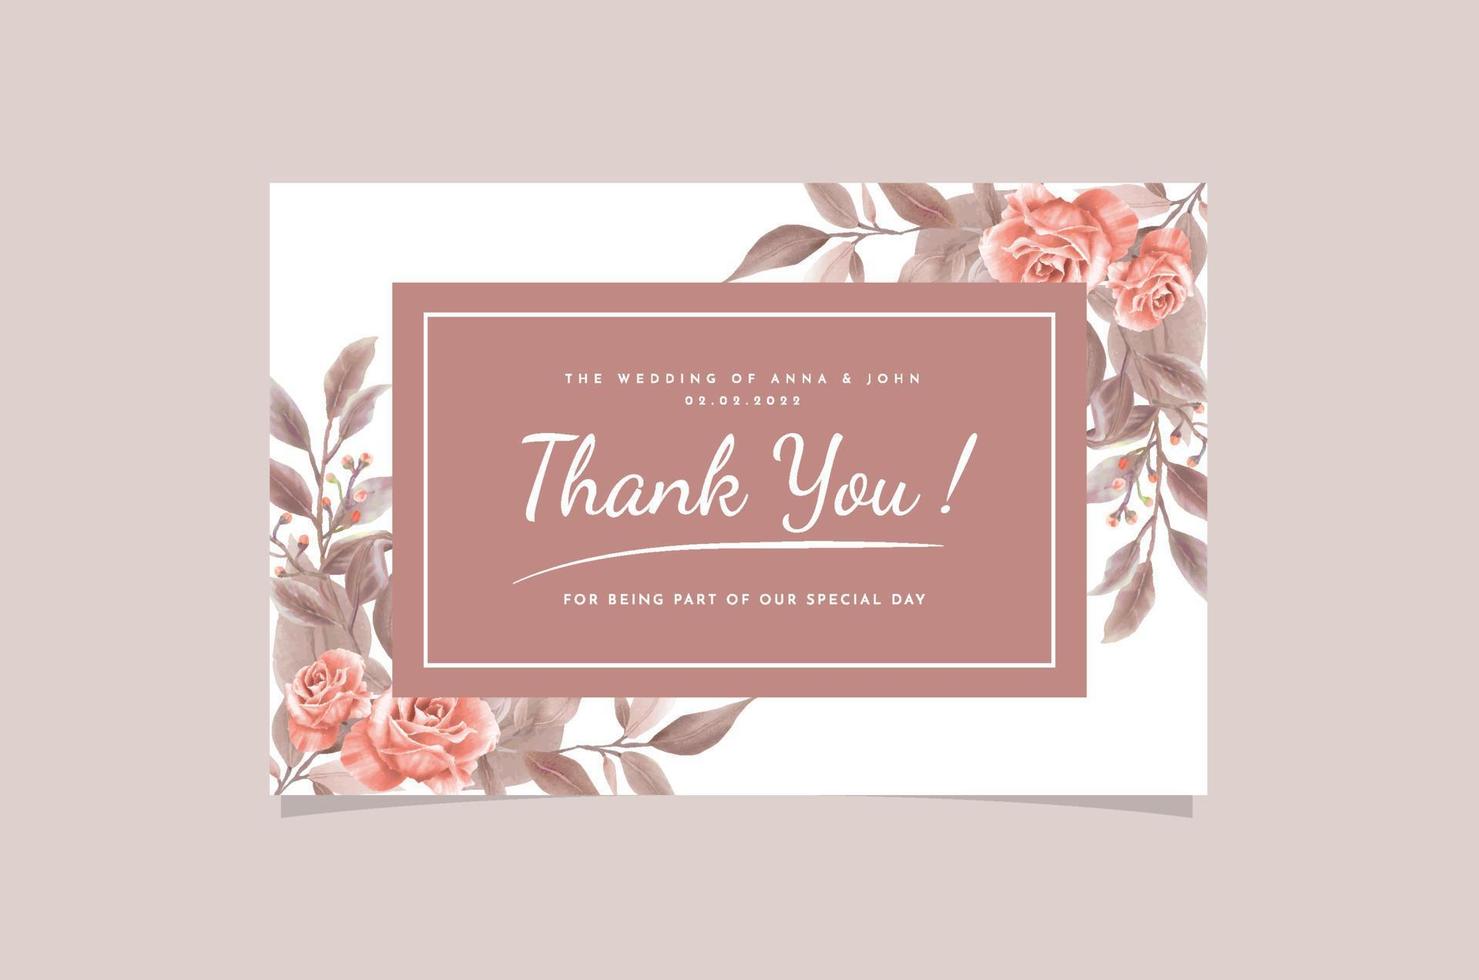 Hand Drawing Wedding Thank Card Floral Design vector